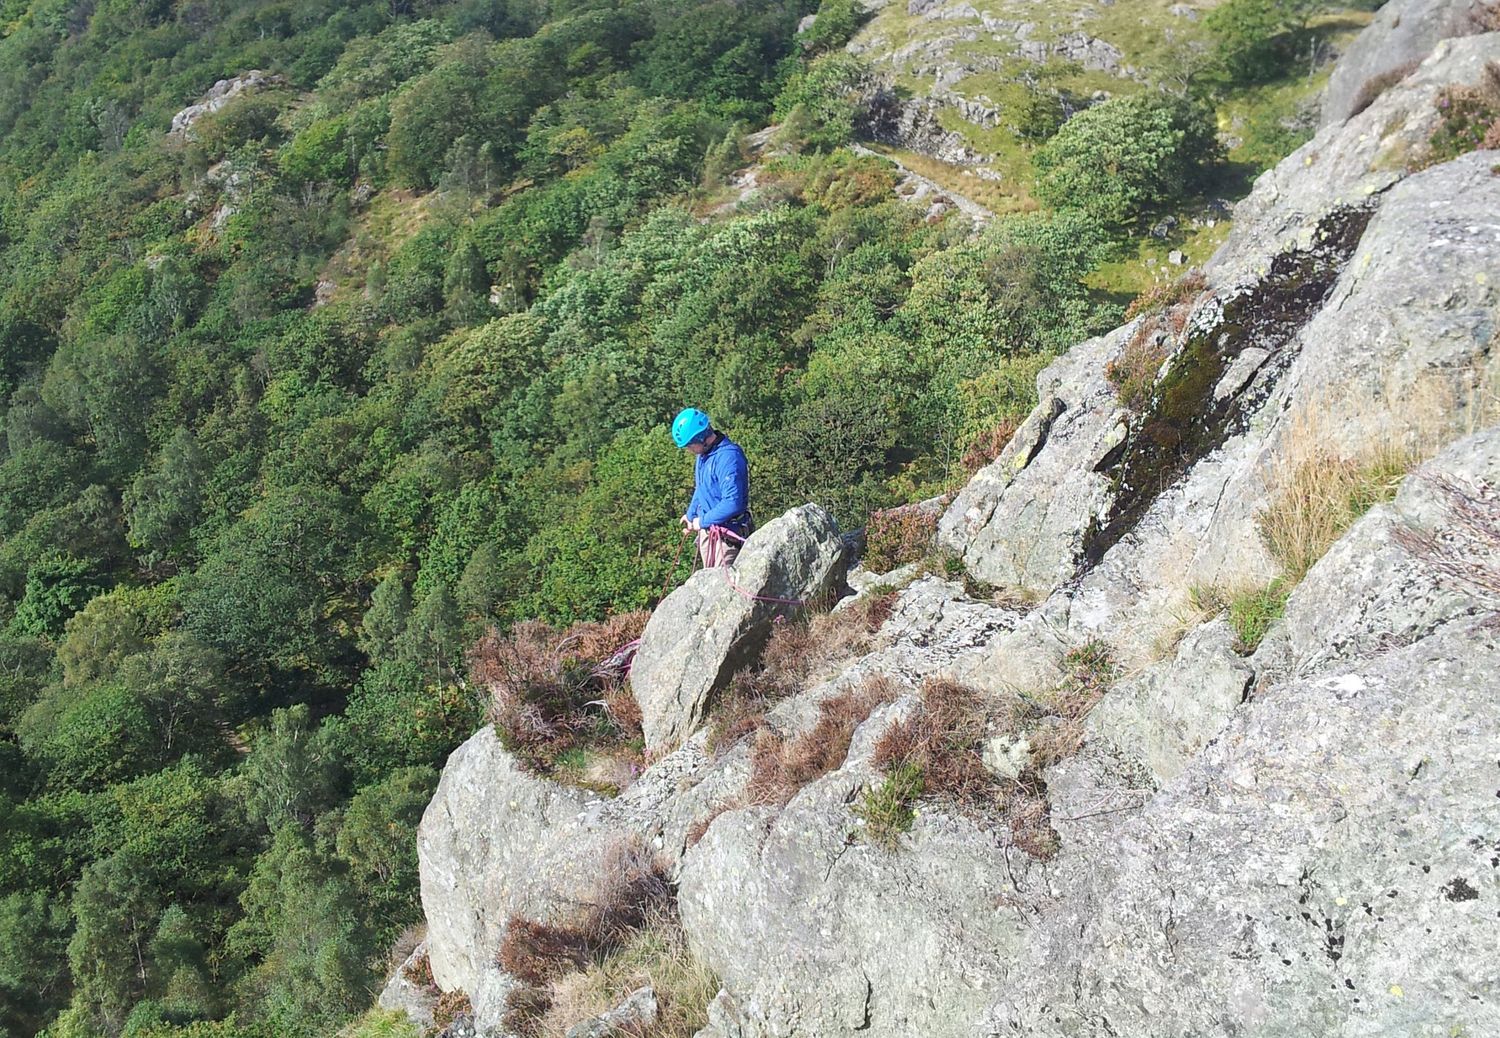  Belaying on a multi pitch climb in the Lake District - Chris Ensoll Mountain Guide 